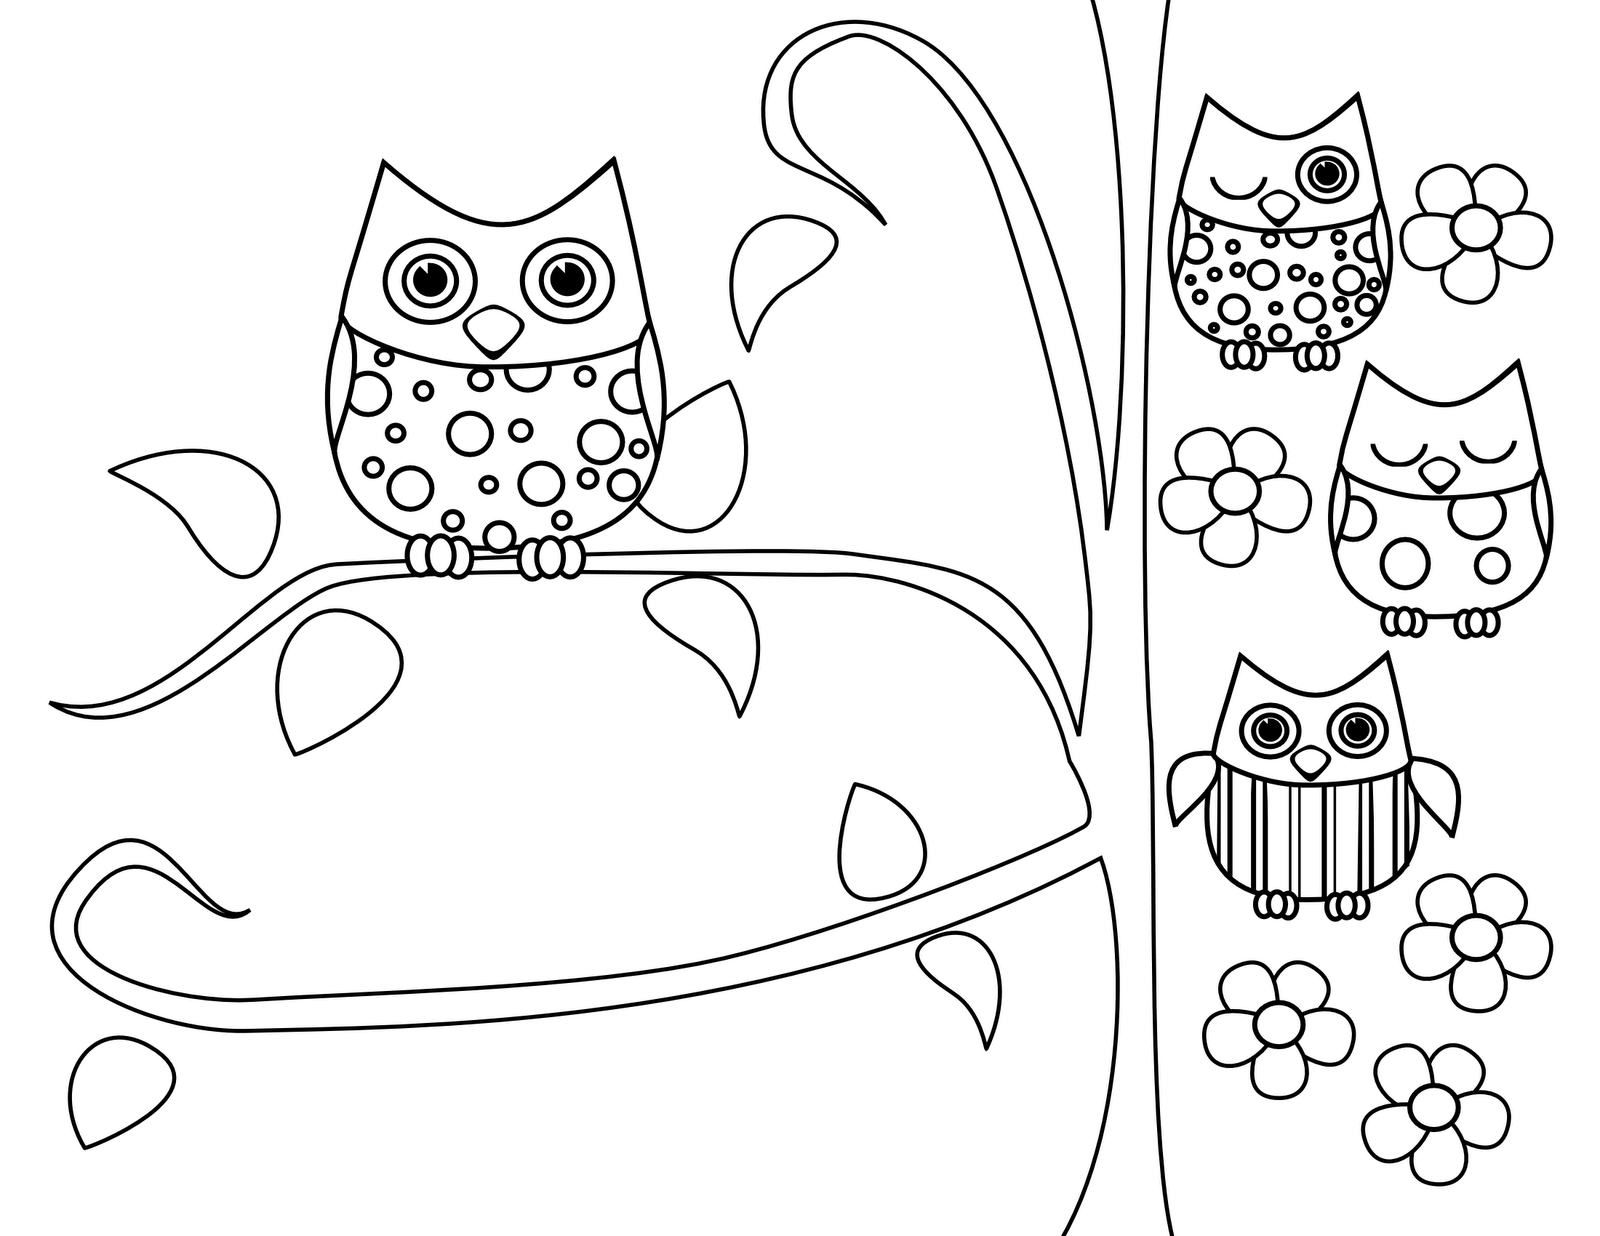 clip art you can color - photo #30